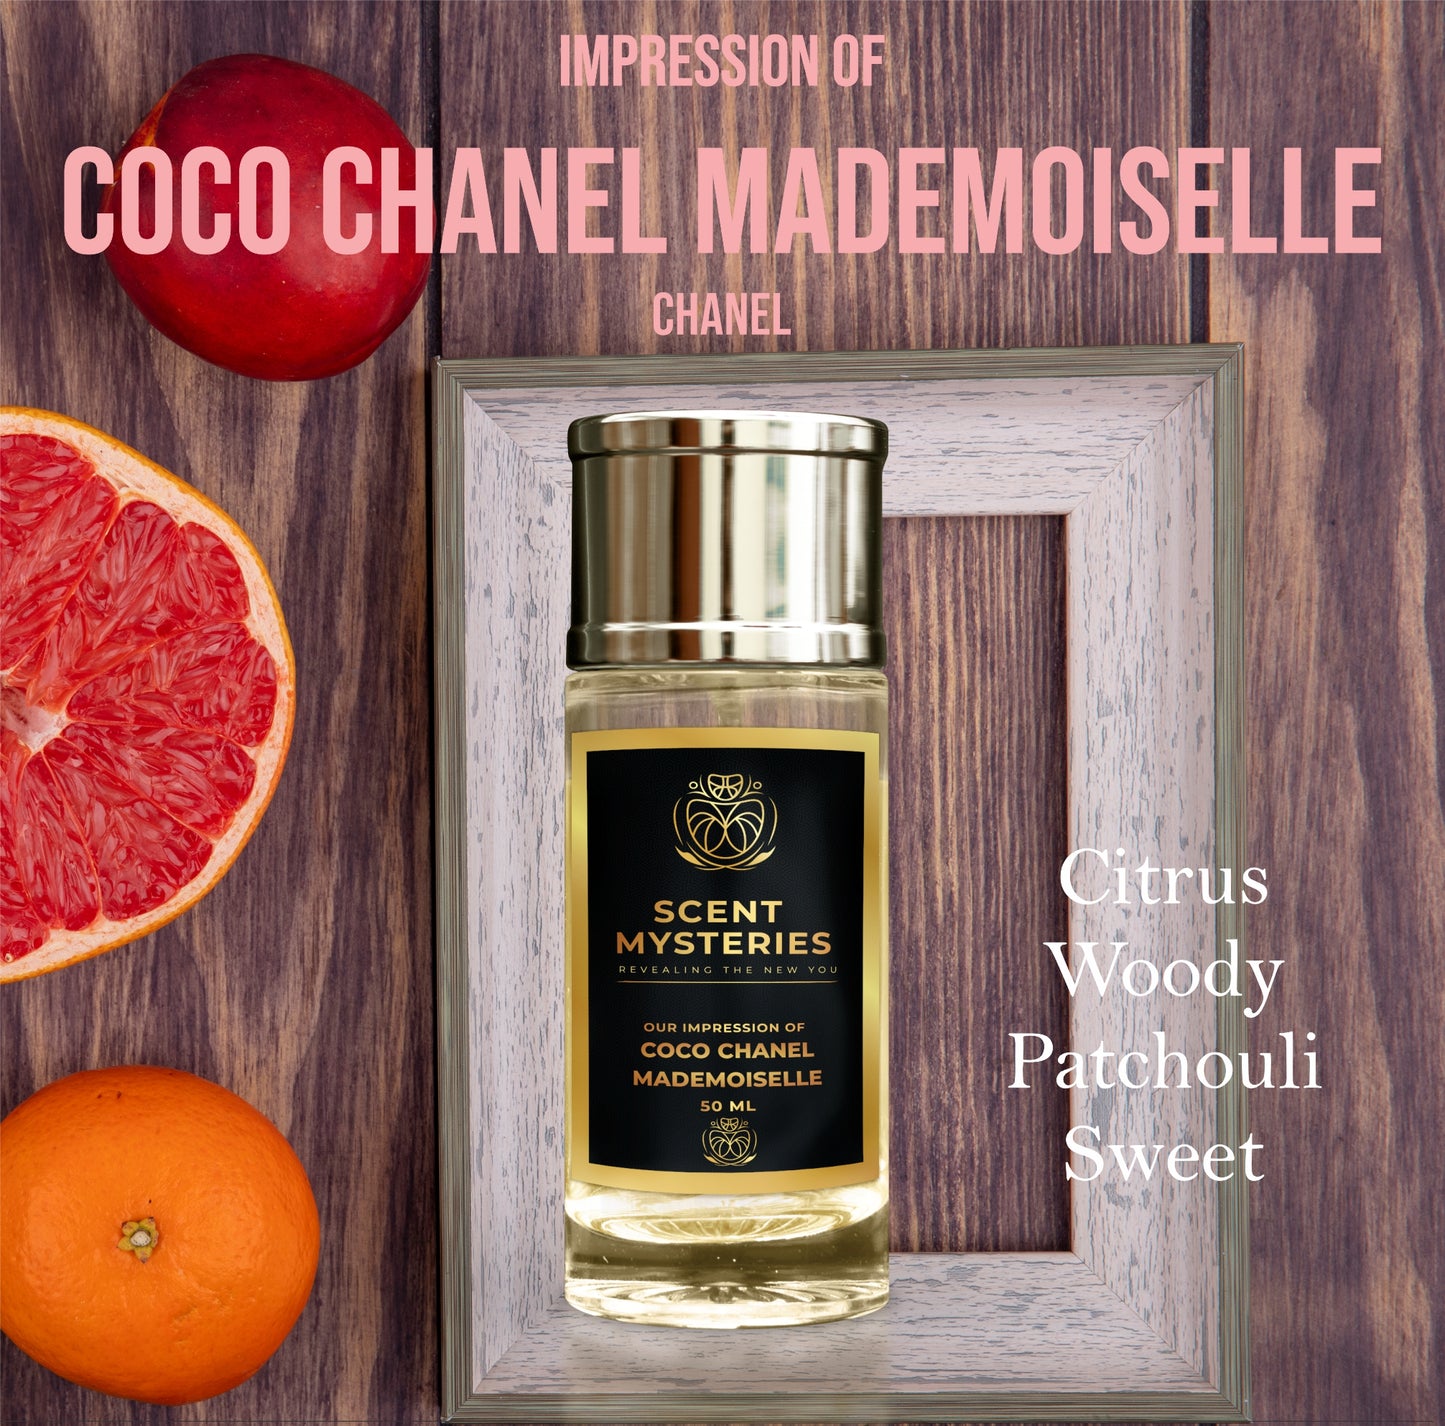 Impression of Coco Chanel Mademoiselle